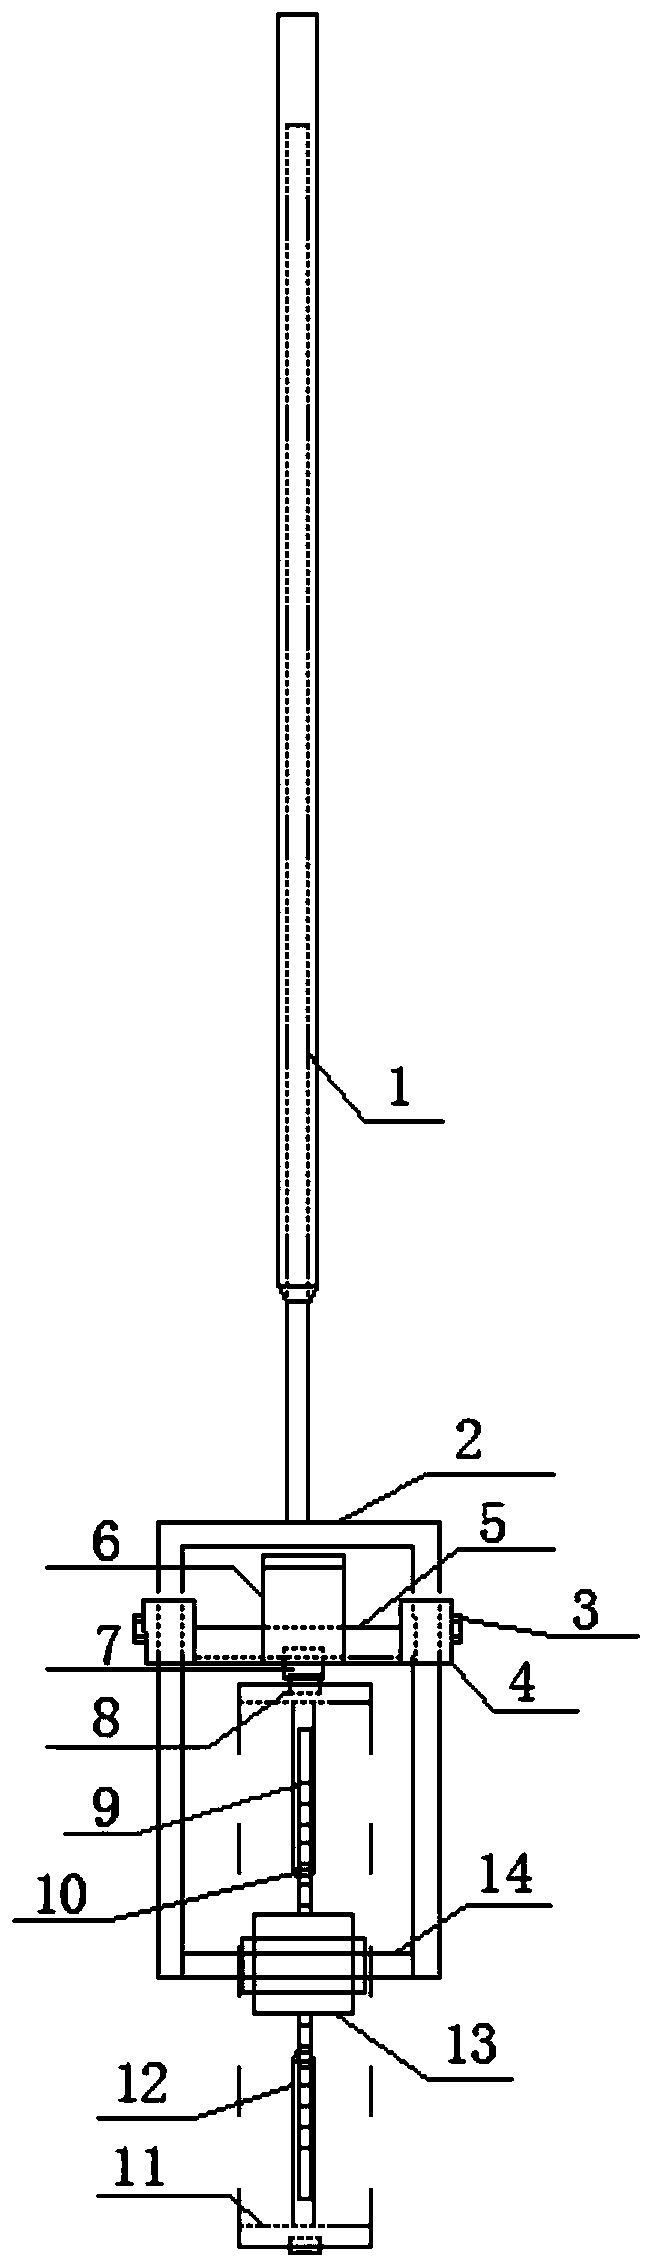 Adjustable steel bar positioning and point distributing device